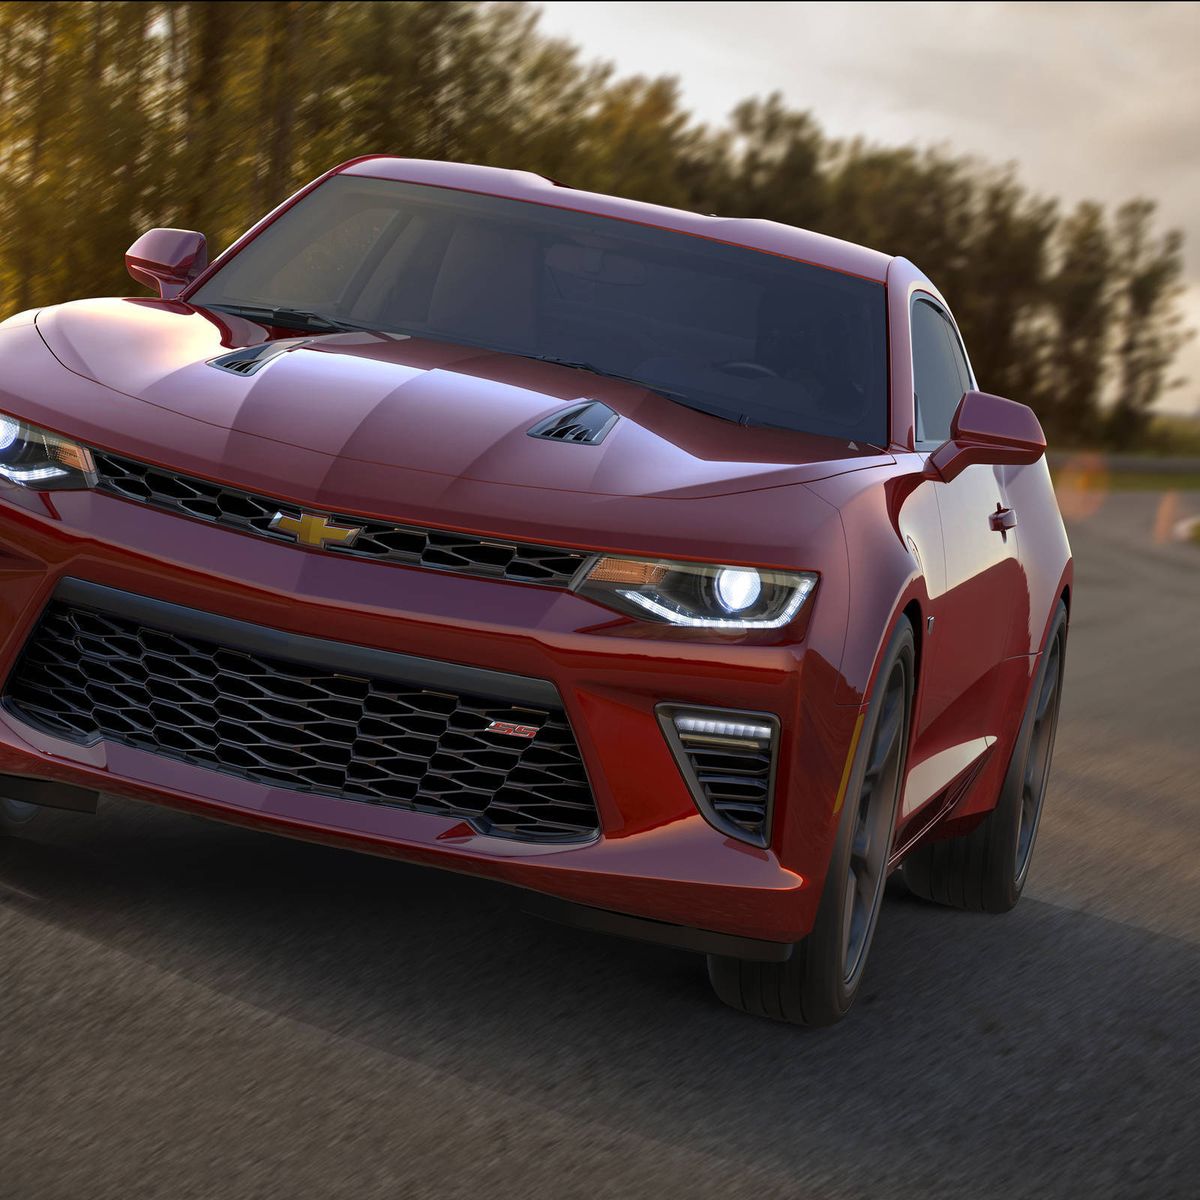 2016 Chevy Camaro MSRP? $26,695 ... and up